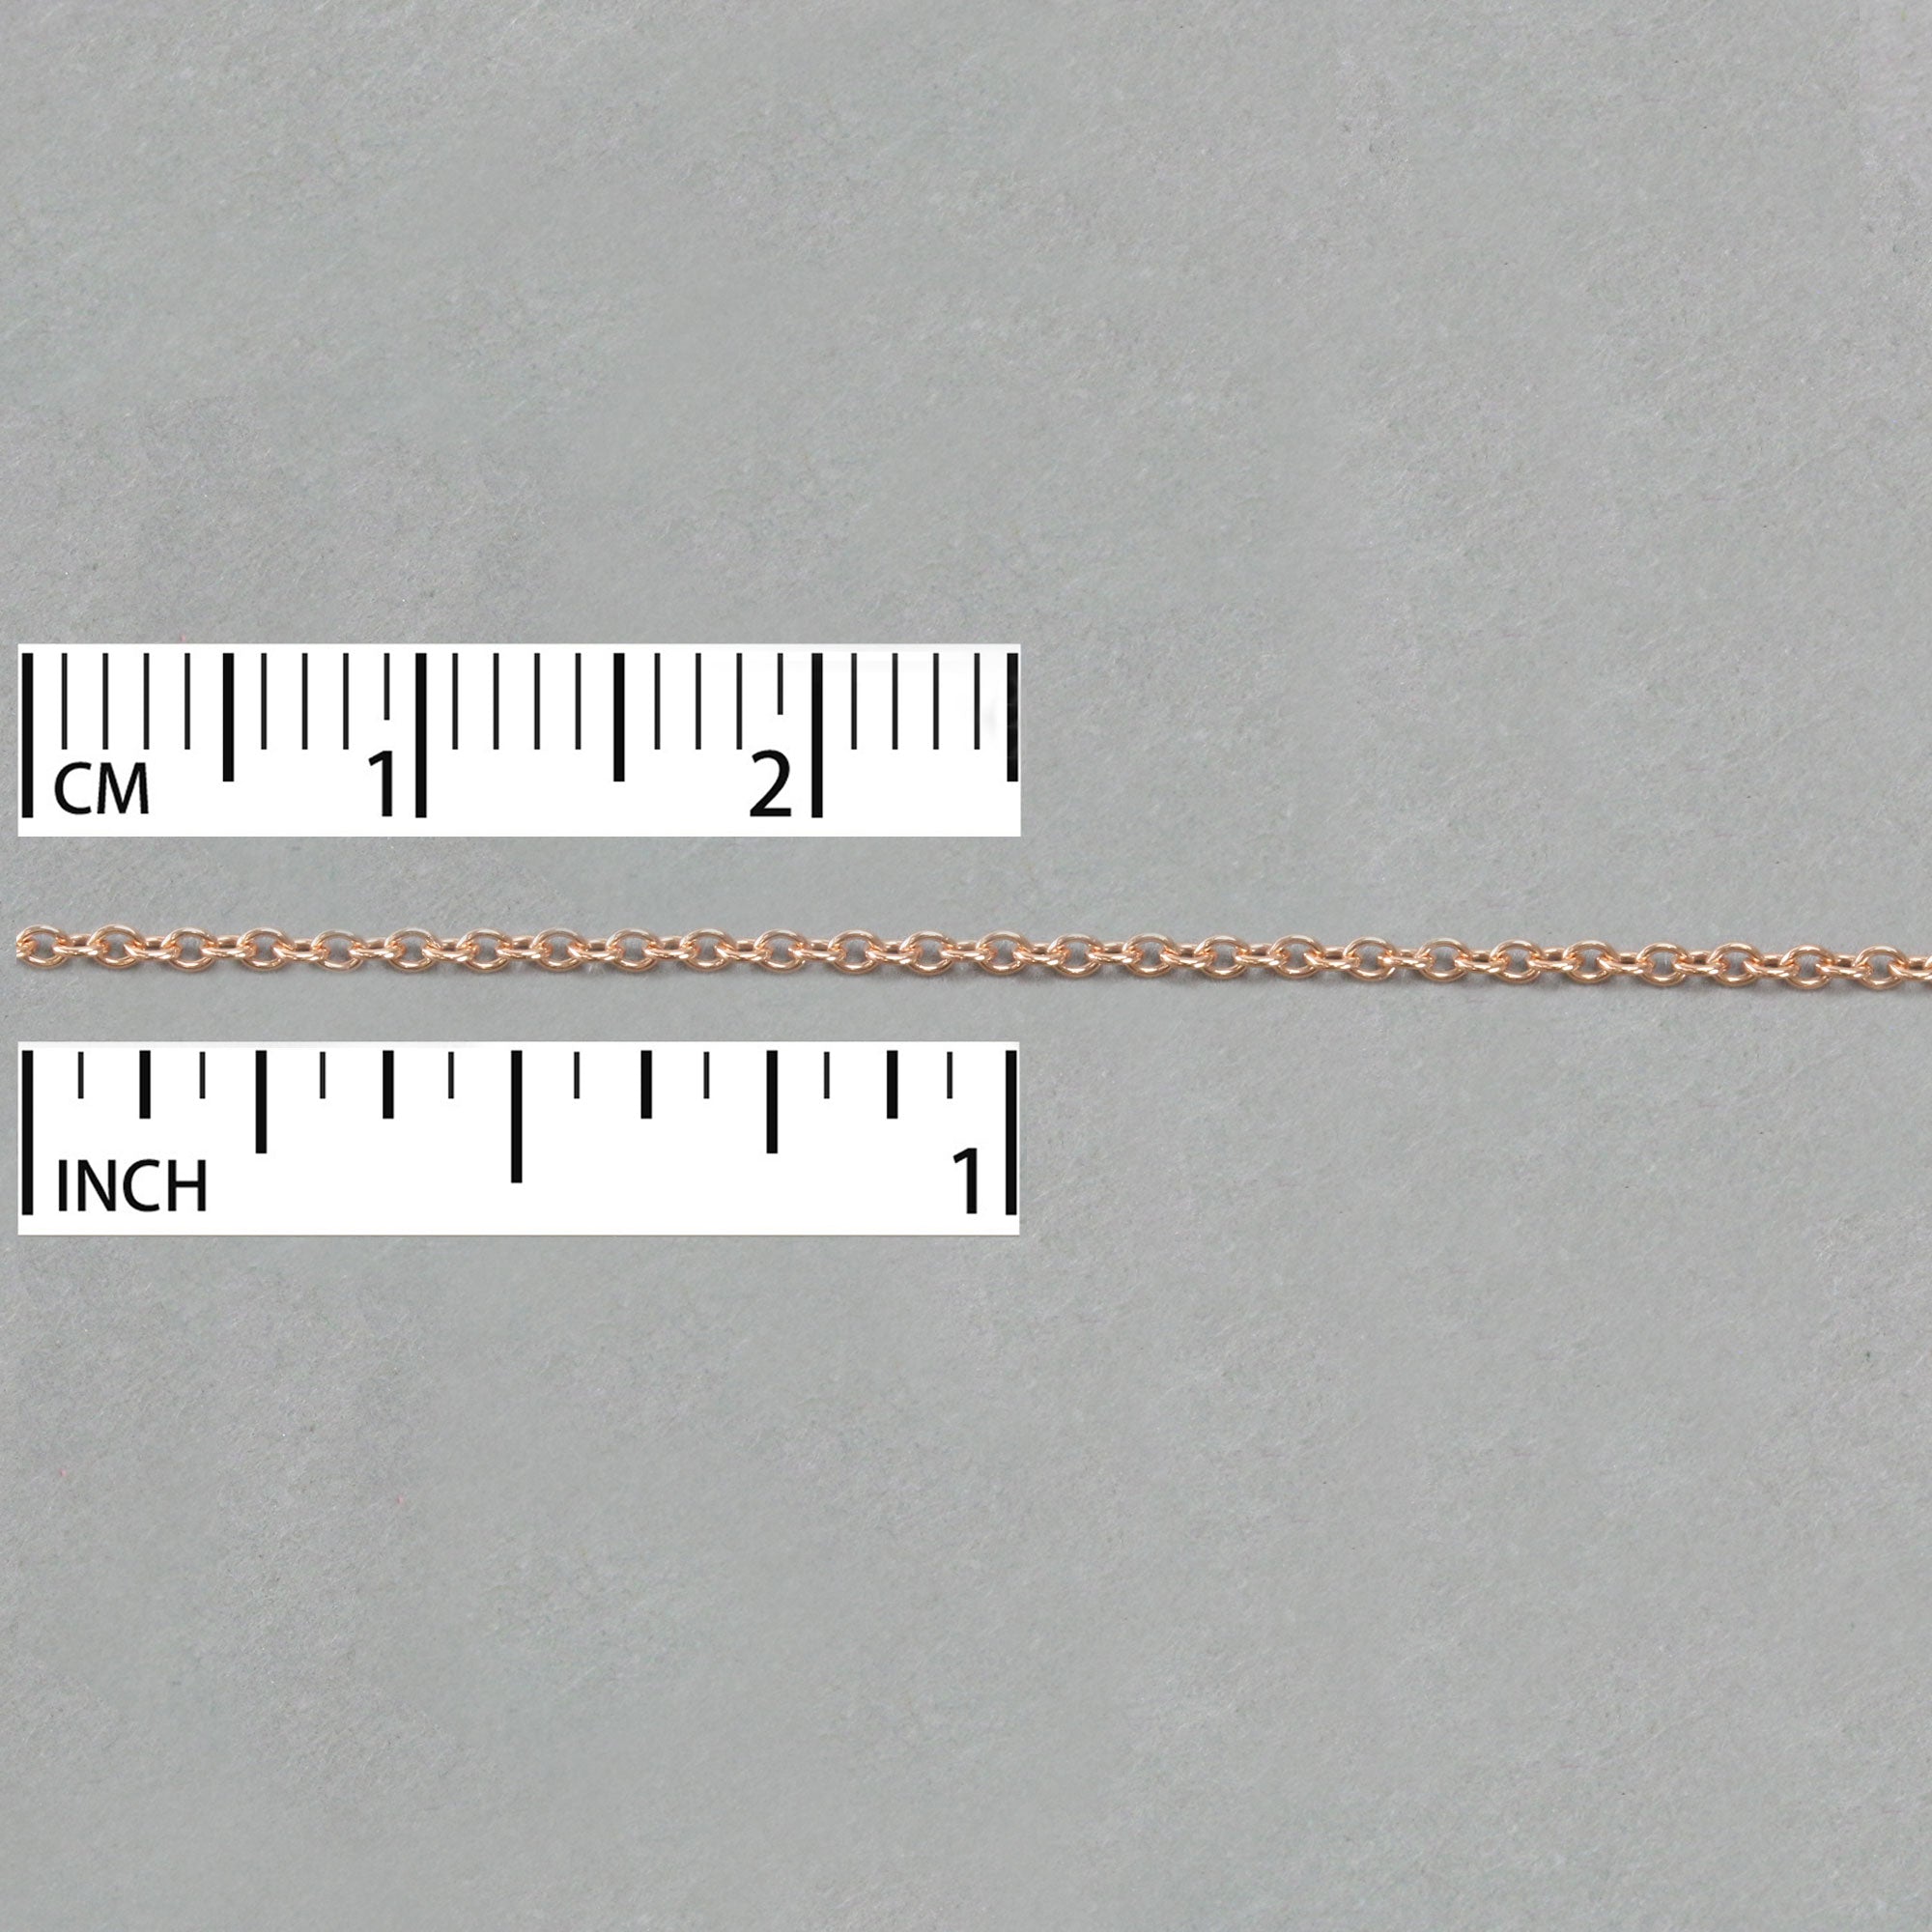 9ct Rose Gold Round Wire Trace Link Chain